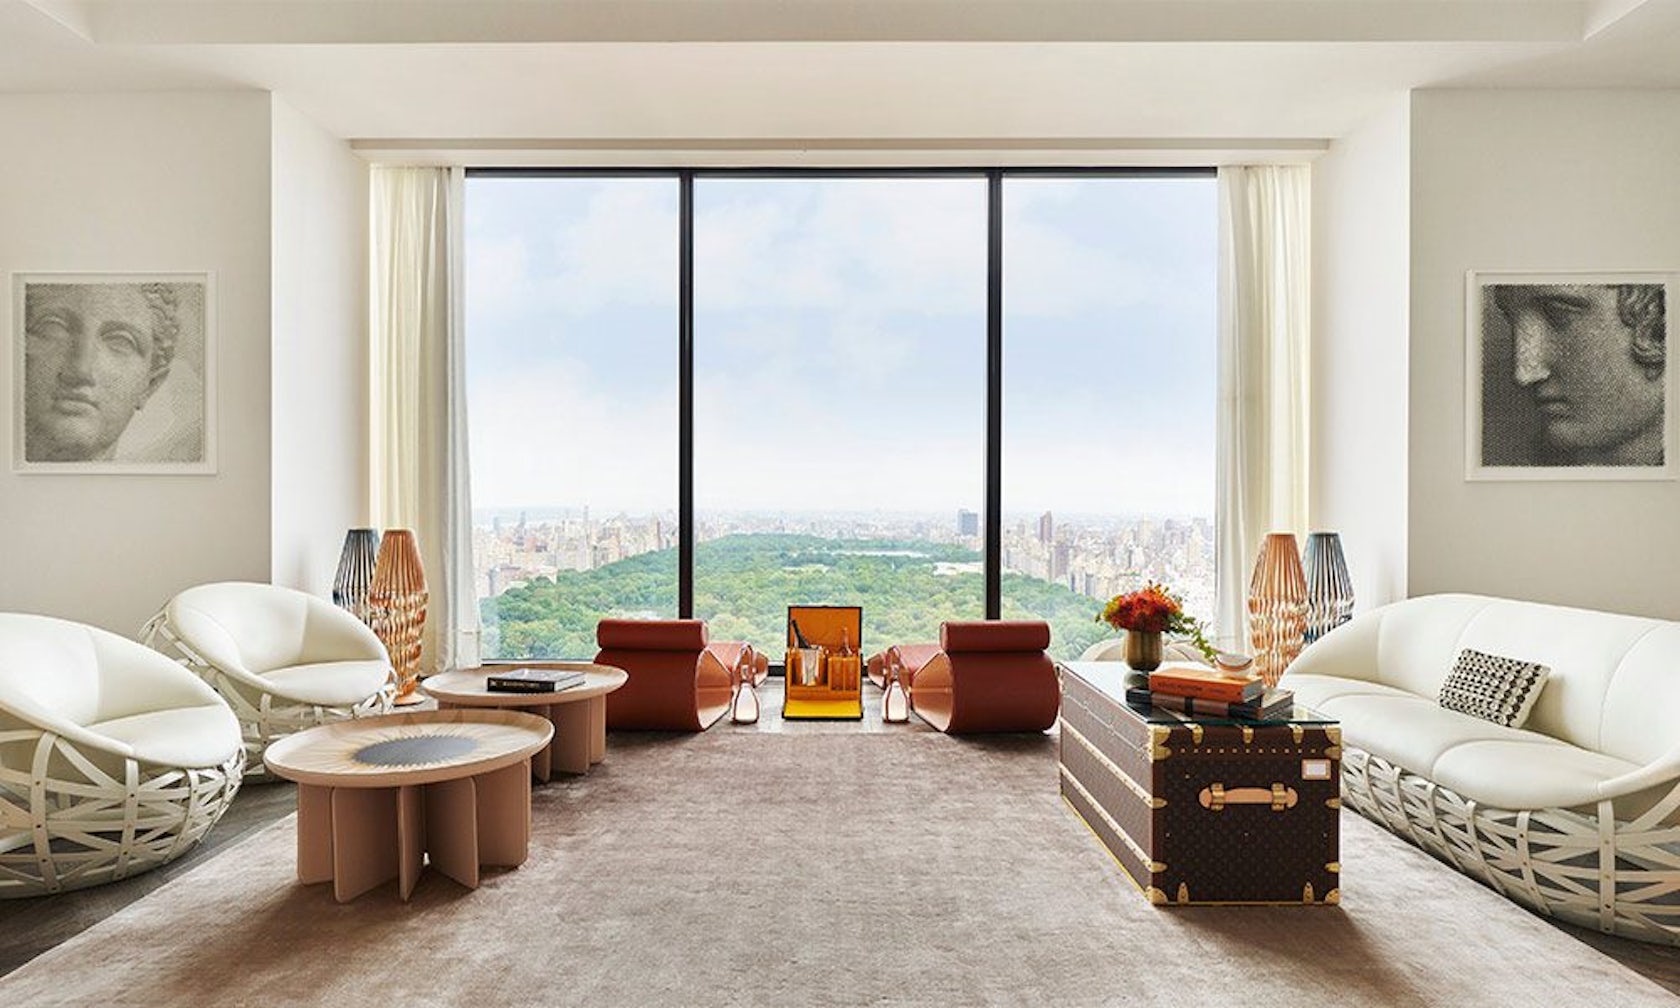 Louis Vuitton Residence At The Steinway Tower, Manhattan NYC by